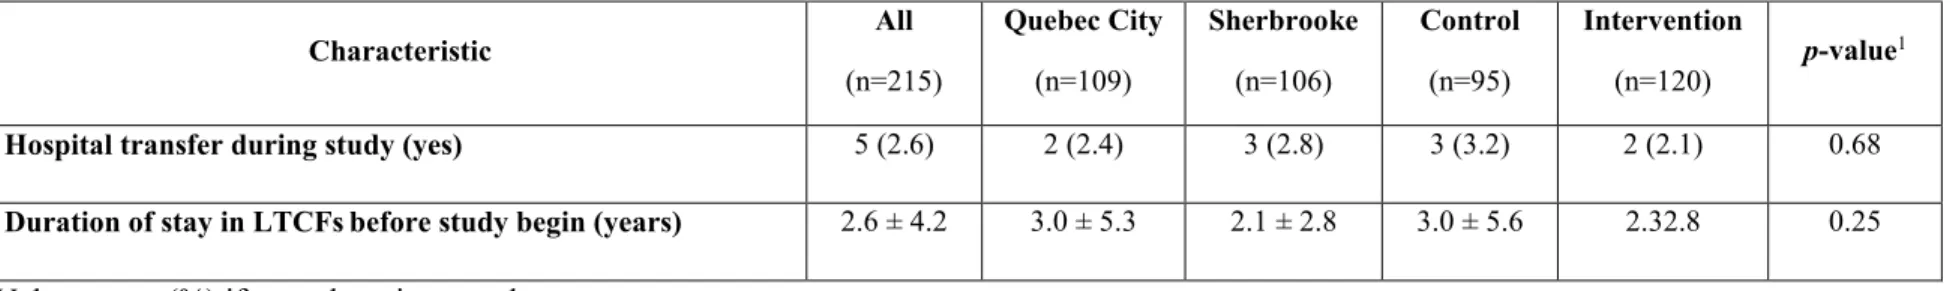 Table 3. Characteristics of subjects by city of study and by intervention group (continued) 